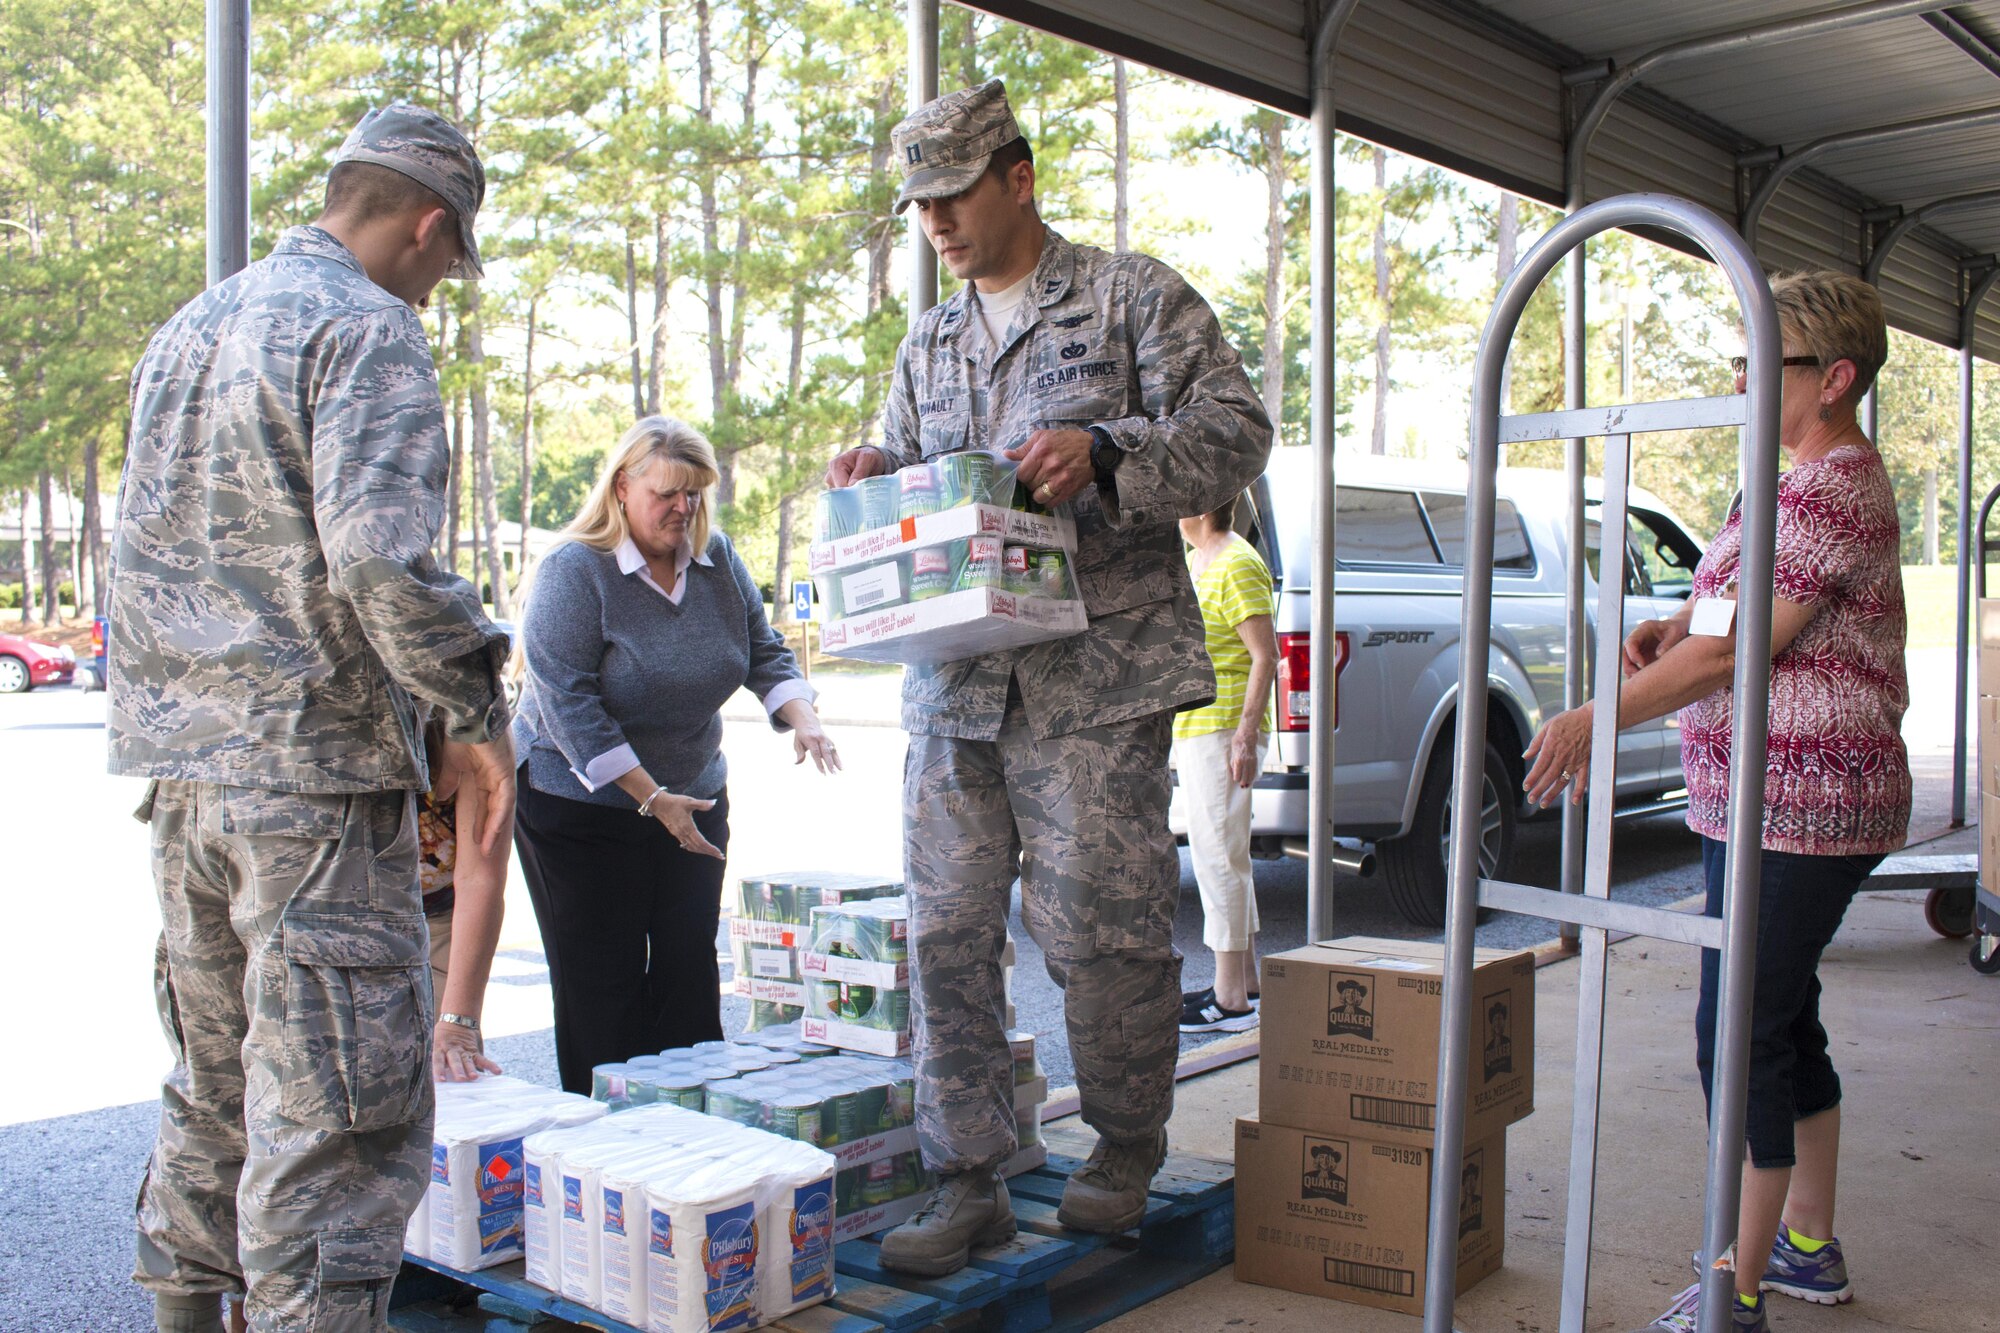 AEDC Feds Feed Families volunteers assist Good Samaritan personnel with loading 1,579 pounds of non-perishable food and dry good donations for delivery Aug. 31, 2016. Pictured left to right are AEDC volunteers Capt. Jonathan Diaz, Peggy Proffitt (behind Diaz), Pamela Anderson and Capt. Michael Davault; and Good Samaritan workers Fay Jones and Grace Thompson. (U.S. Air Force photo/Holly Peterson)